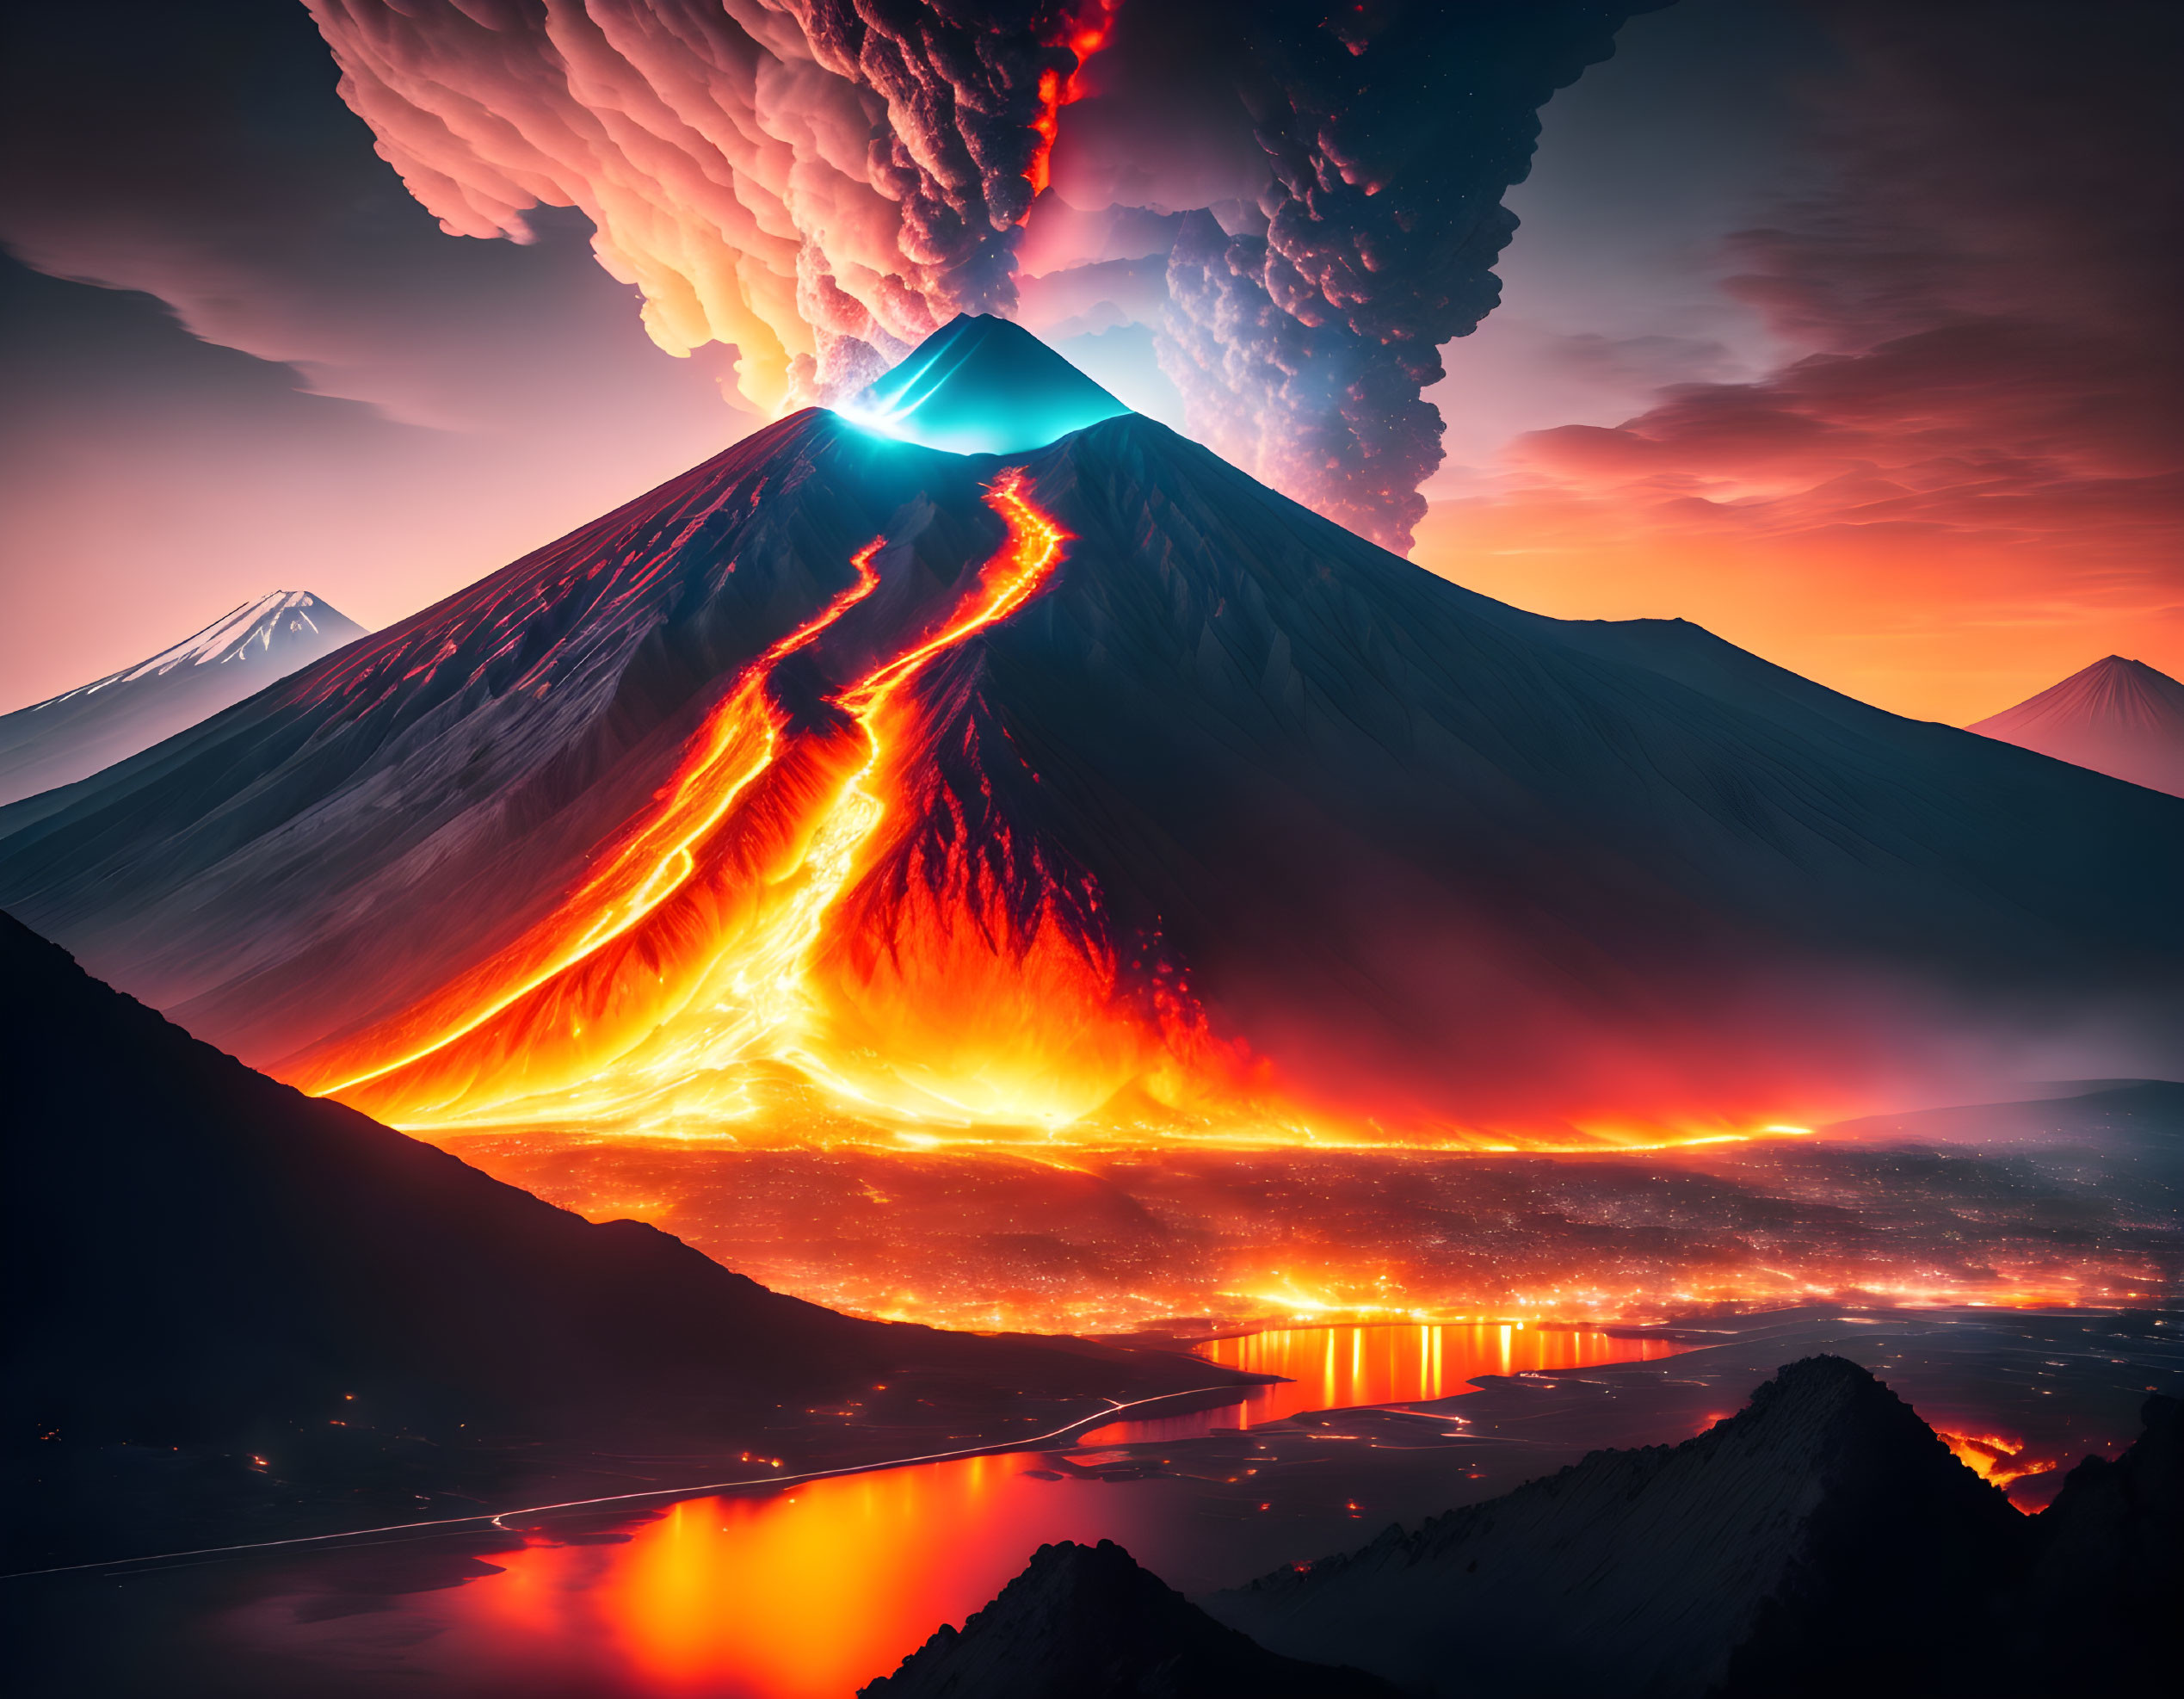 Erupting volcano with flowing lava and ash plume against twilight sky